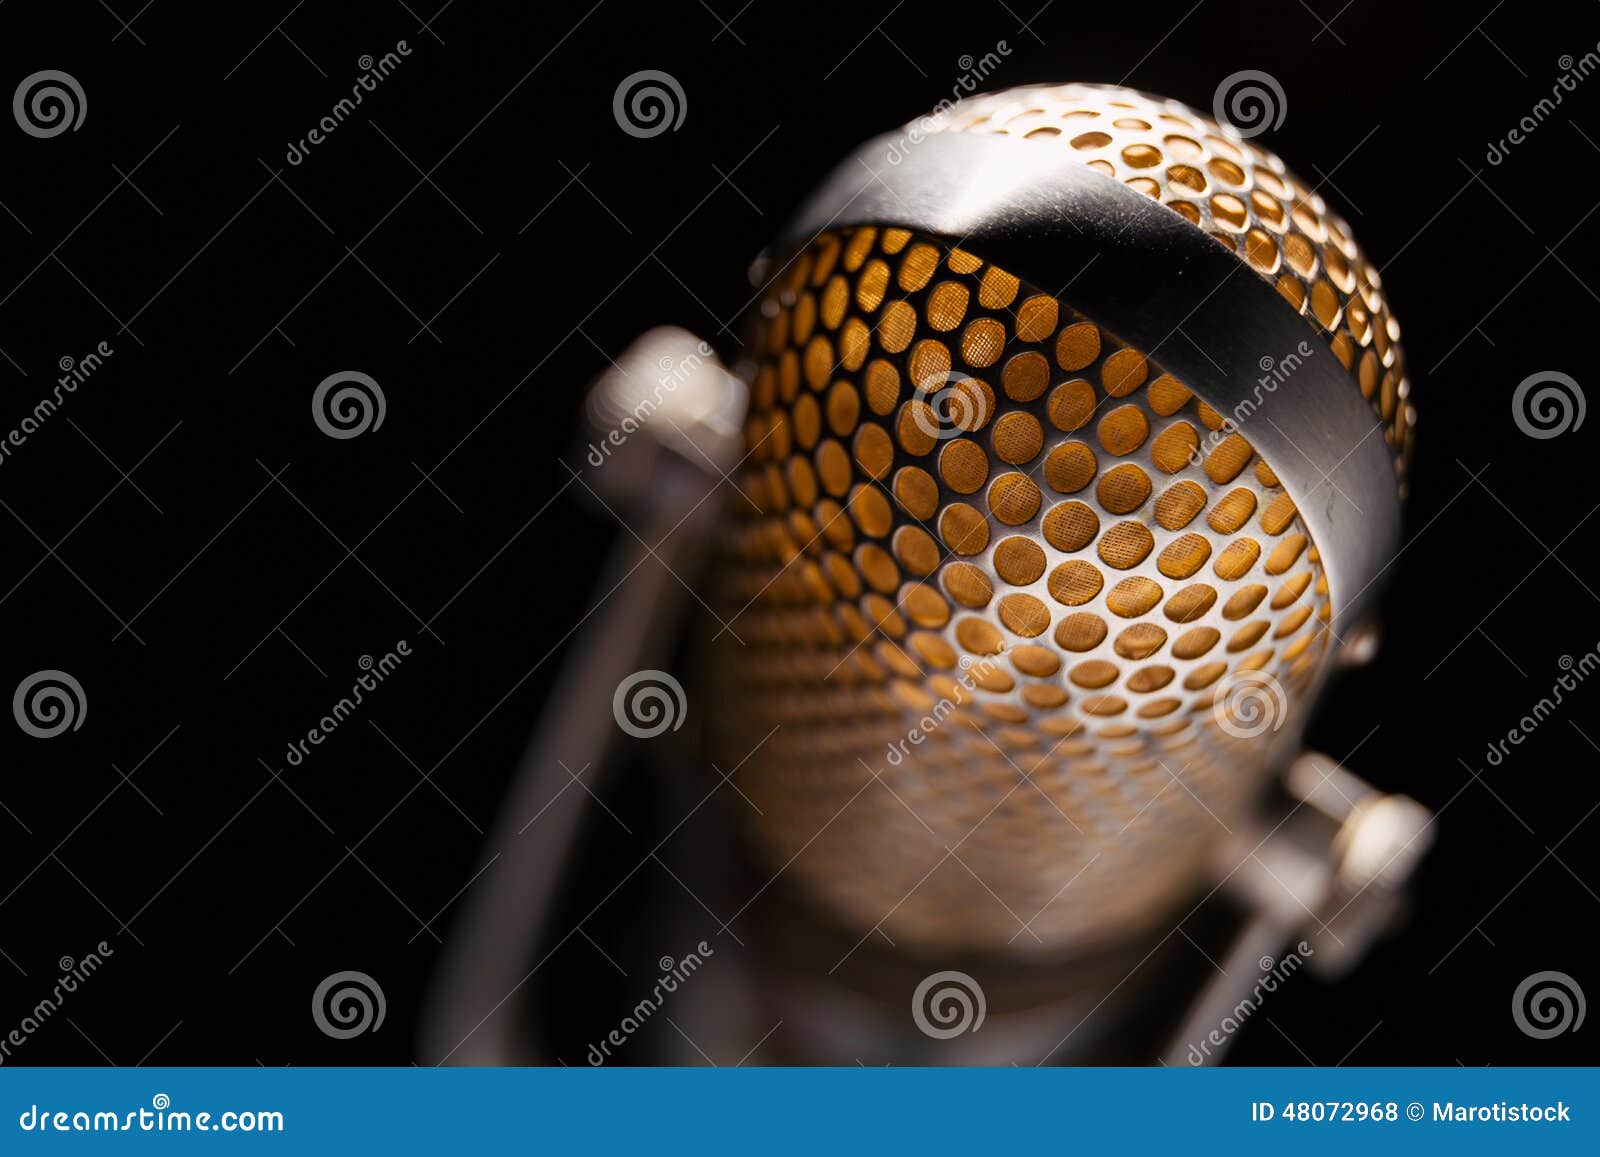 Old microphone. An old pro studio microphone, close up photo